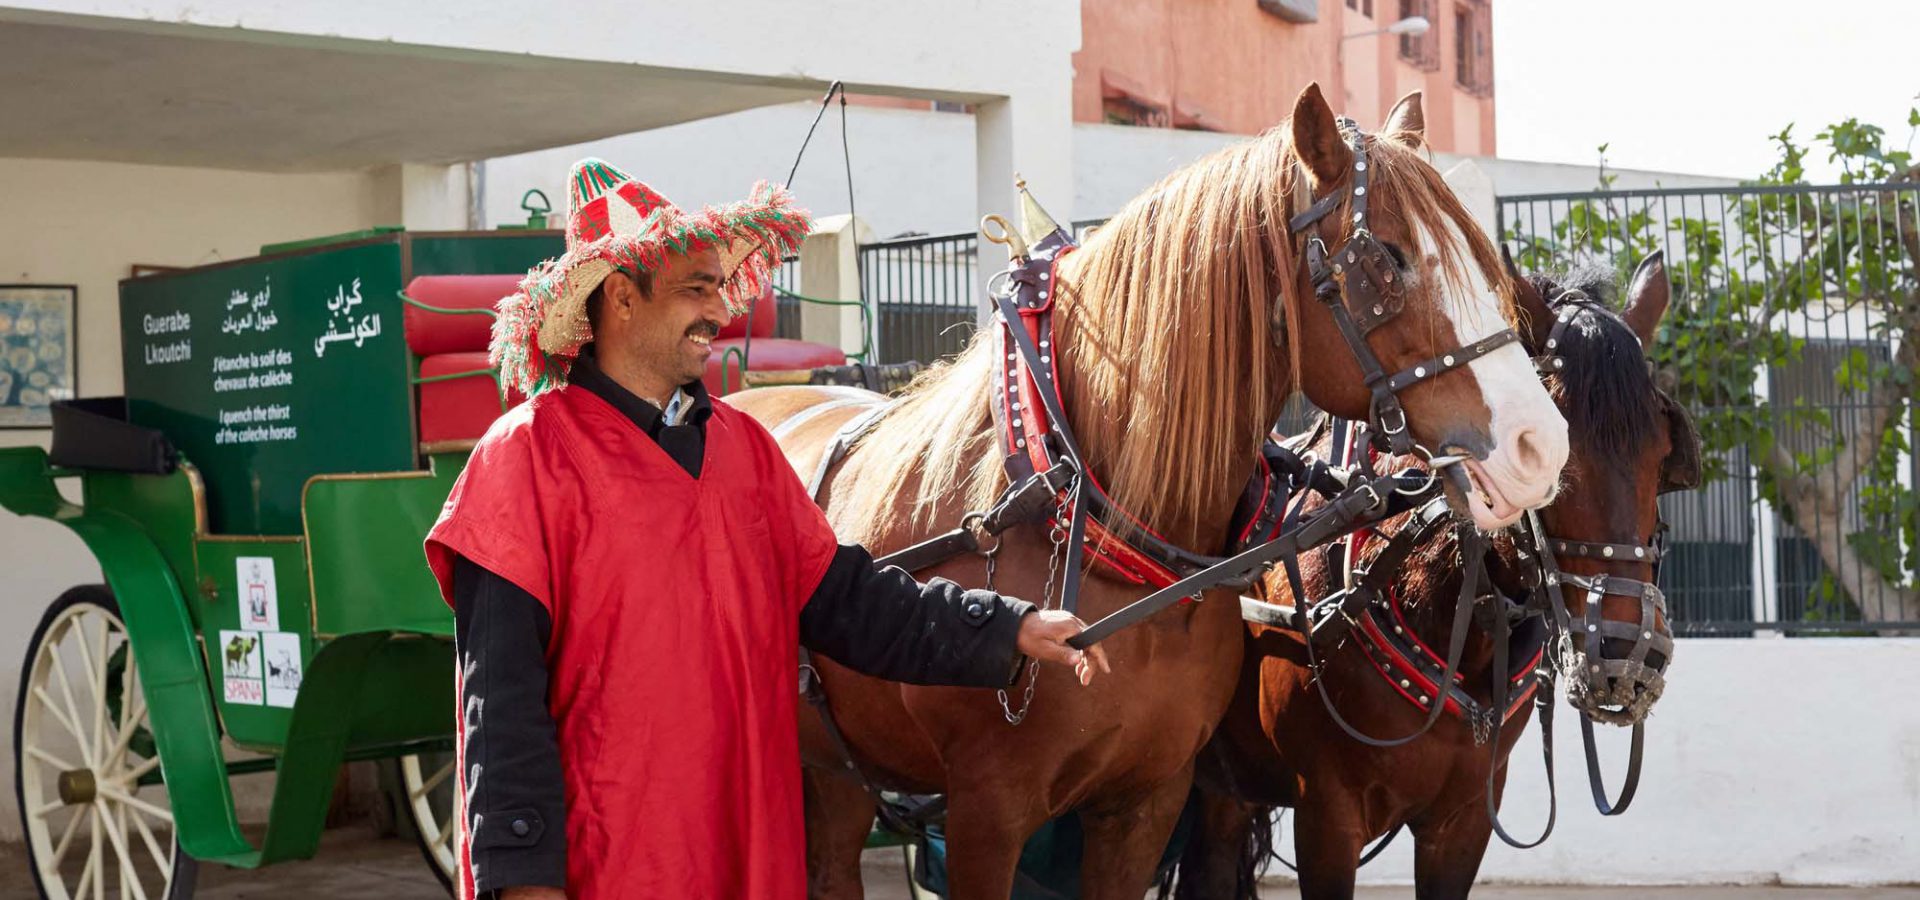 Man standing next to two horses harnessed to carriage